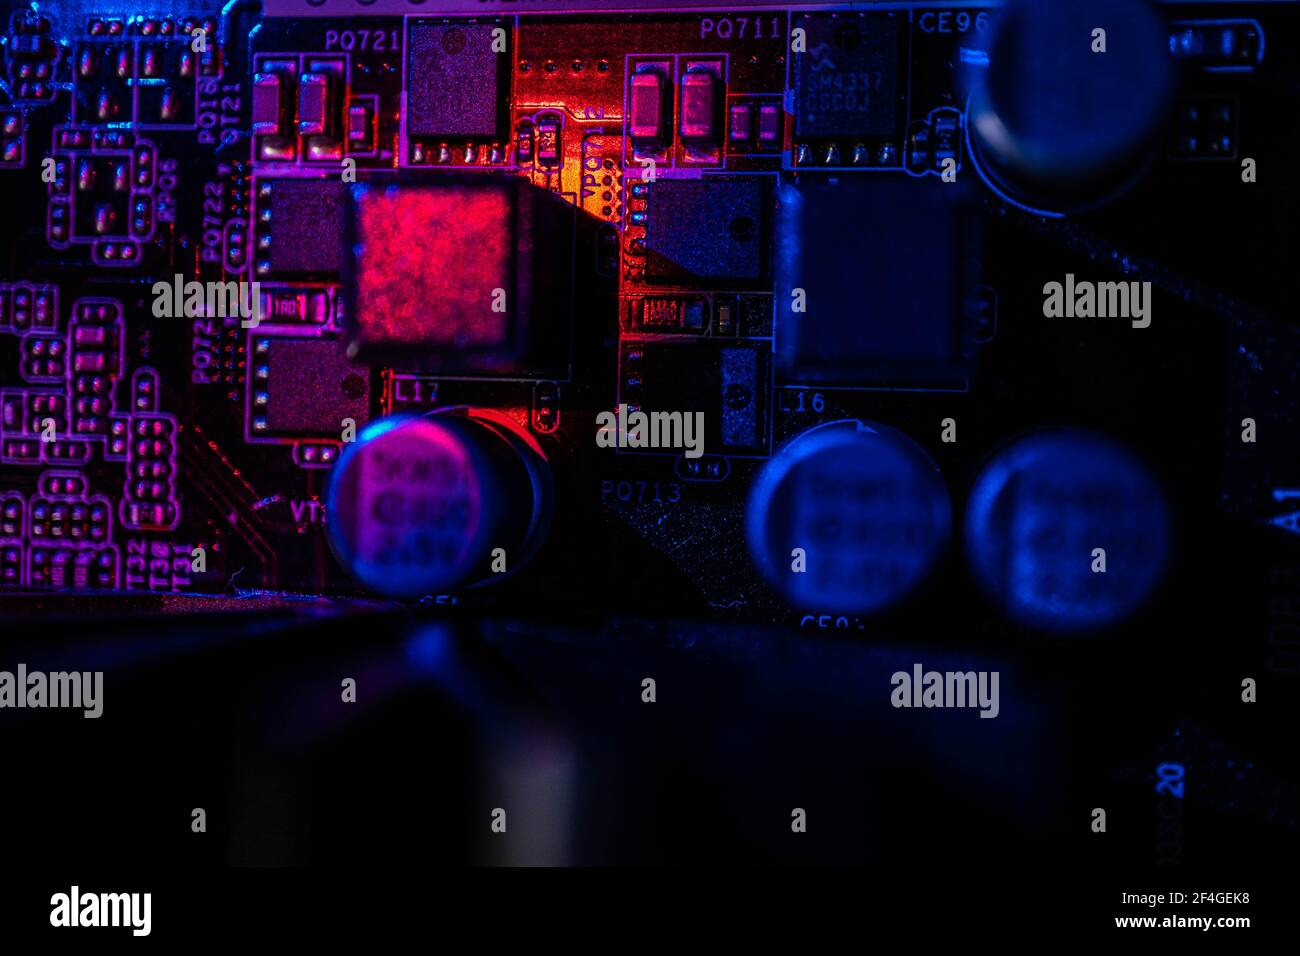 Computer motherboard. Motherboard digital chip. Technology background Stock Photo